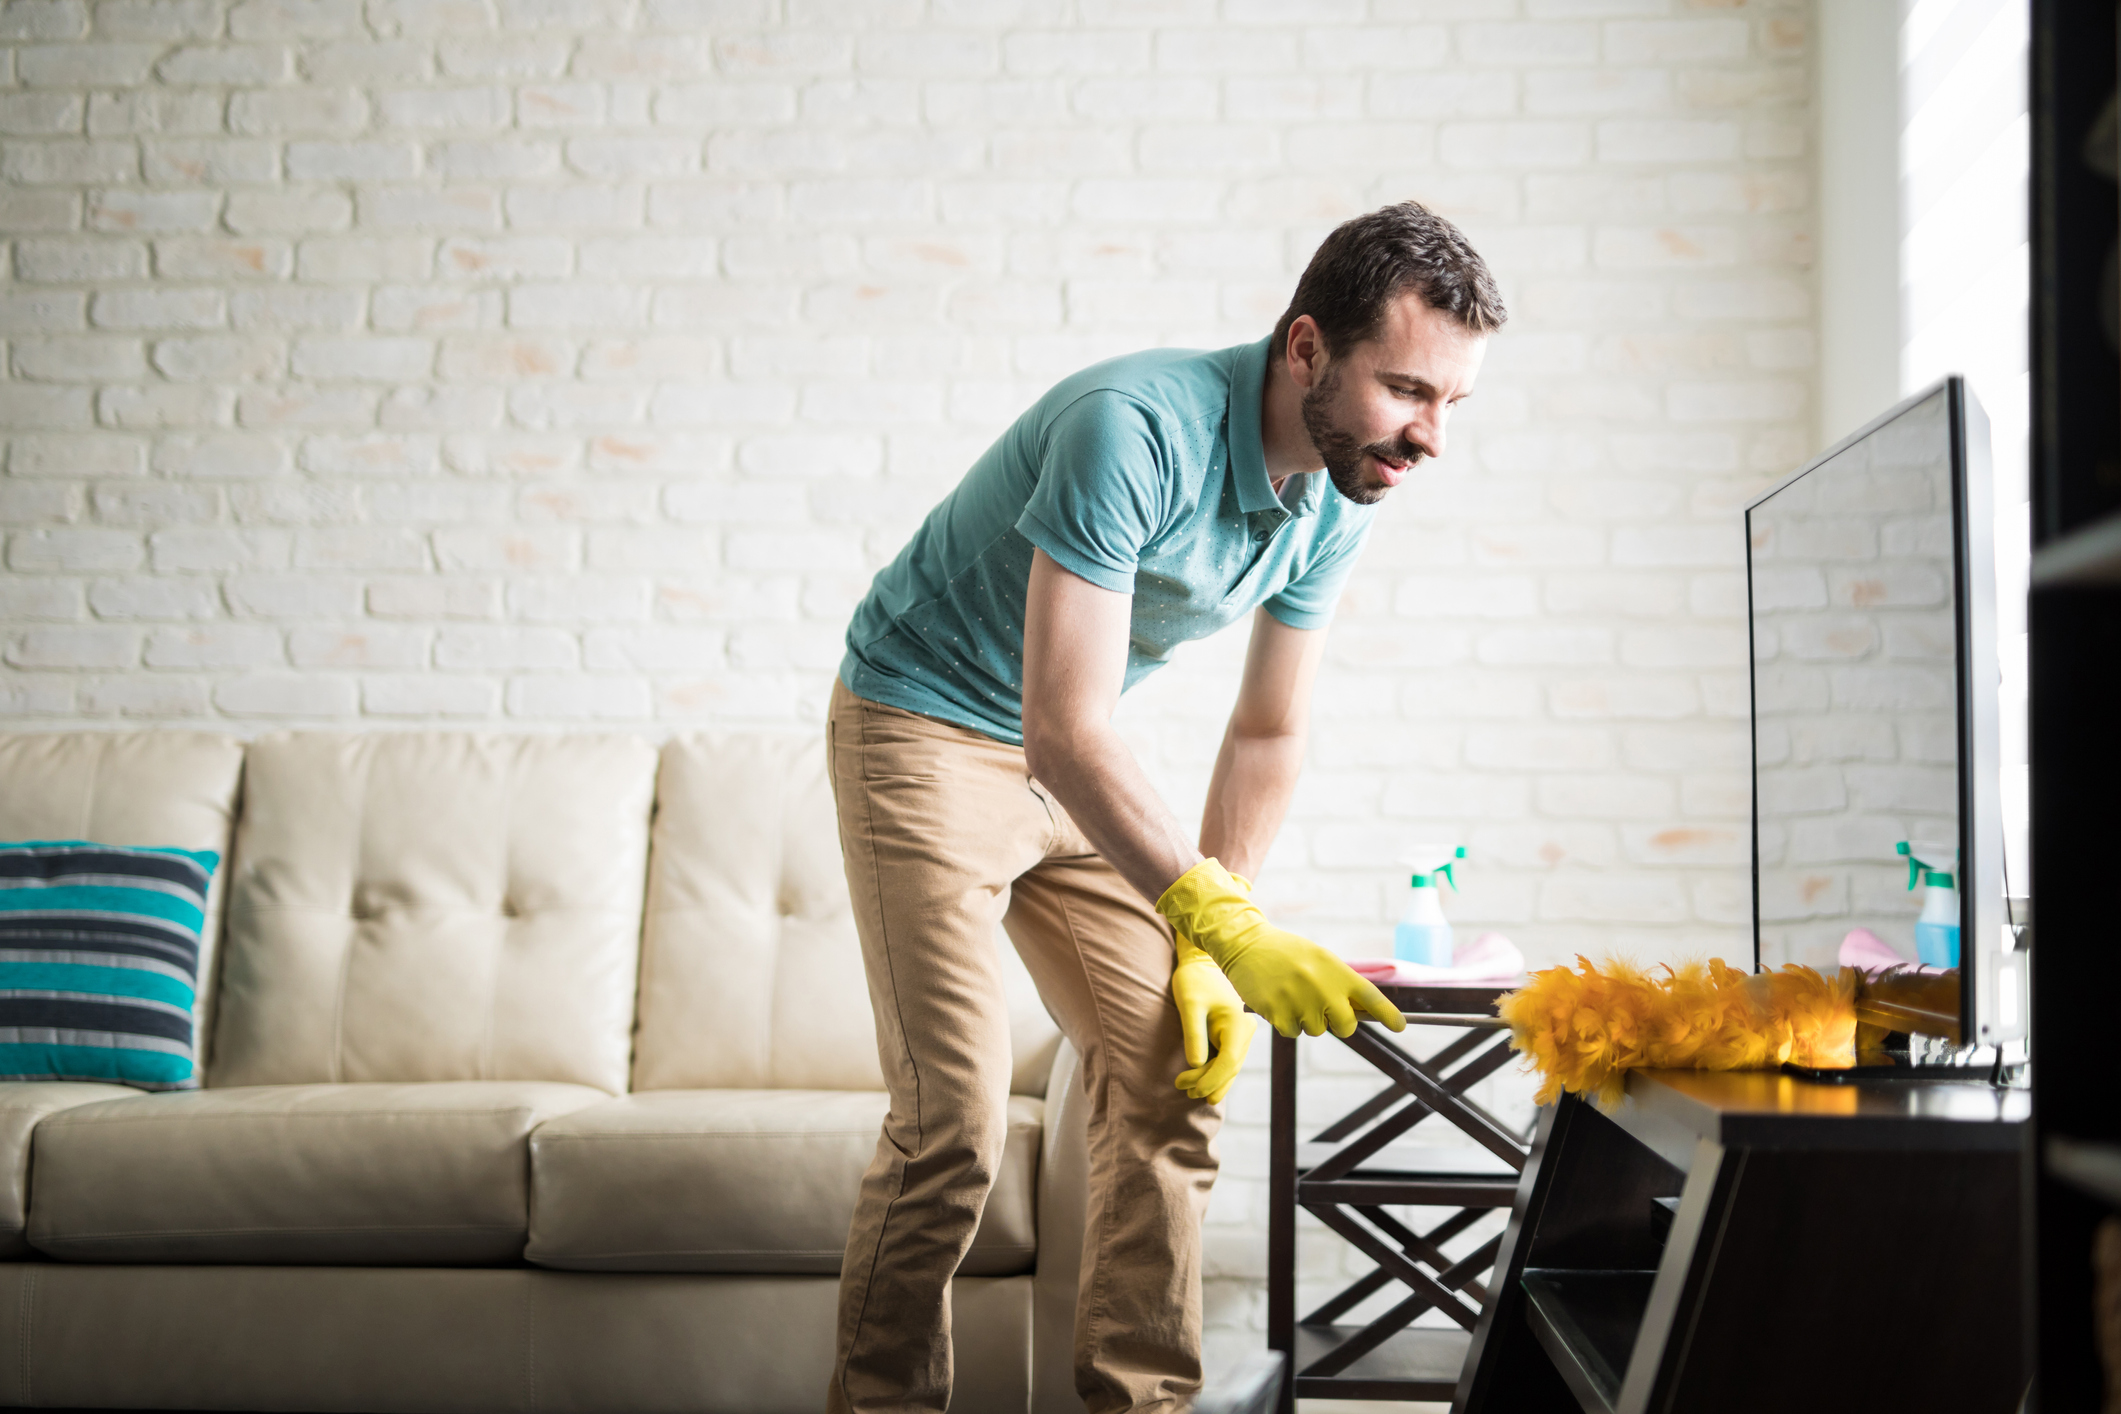 The Viral Couch-Cleaning Hack That Actually Works - How to Clean Your Couch